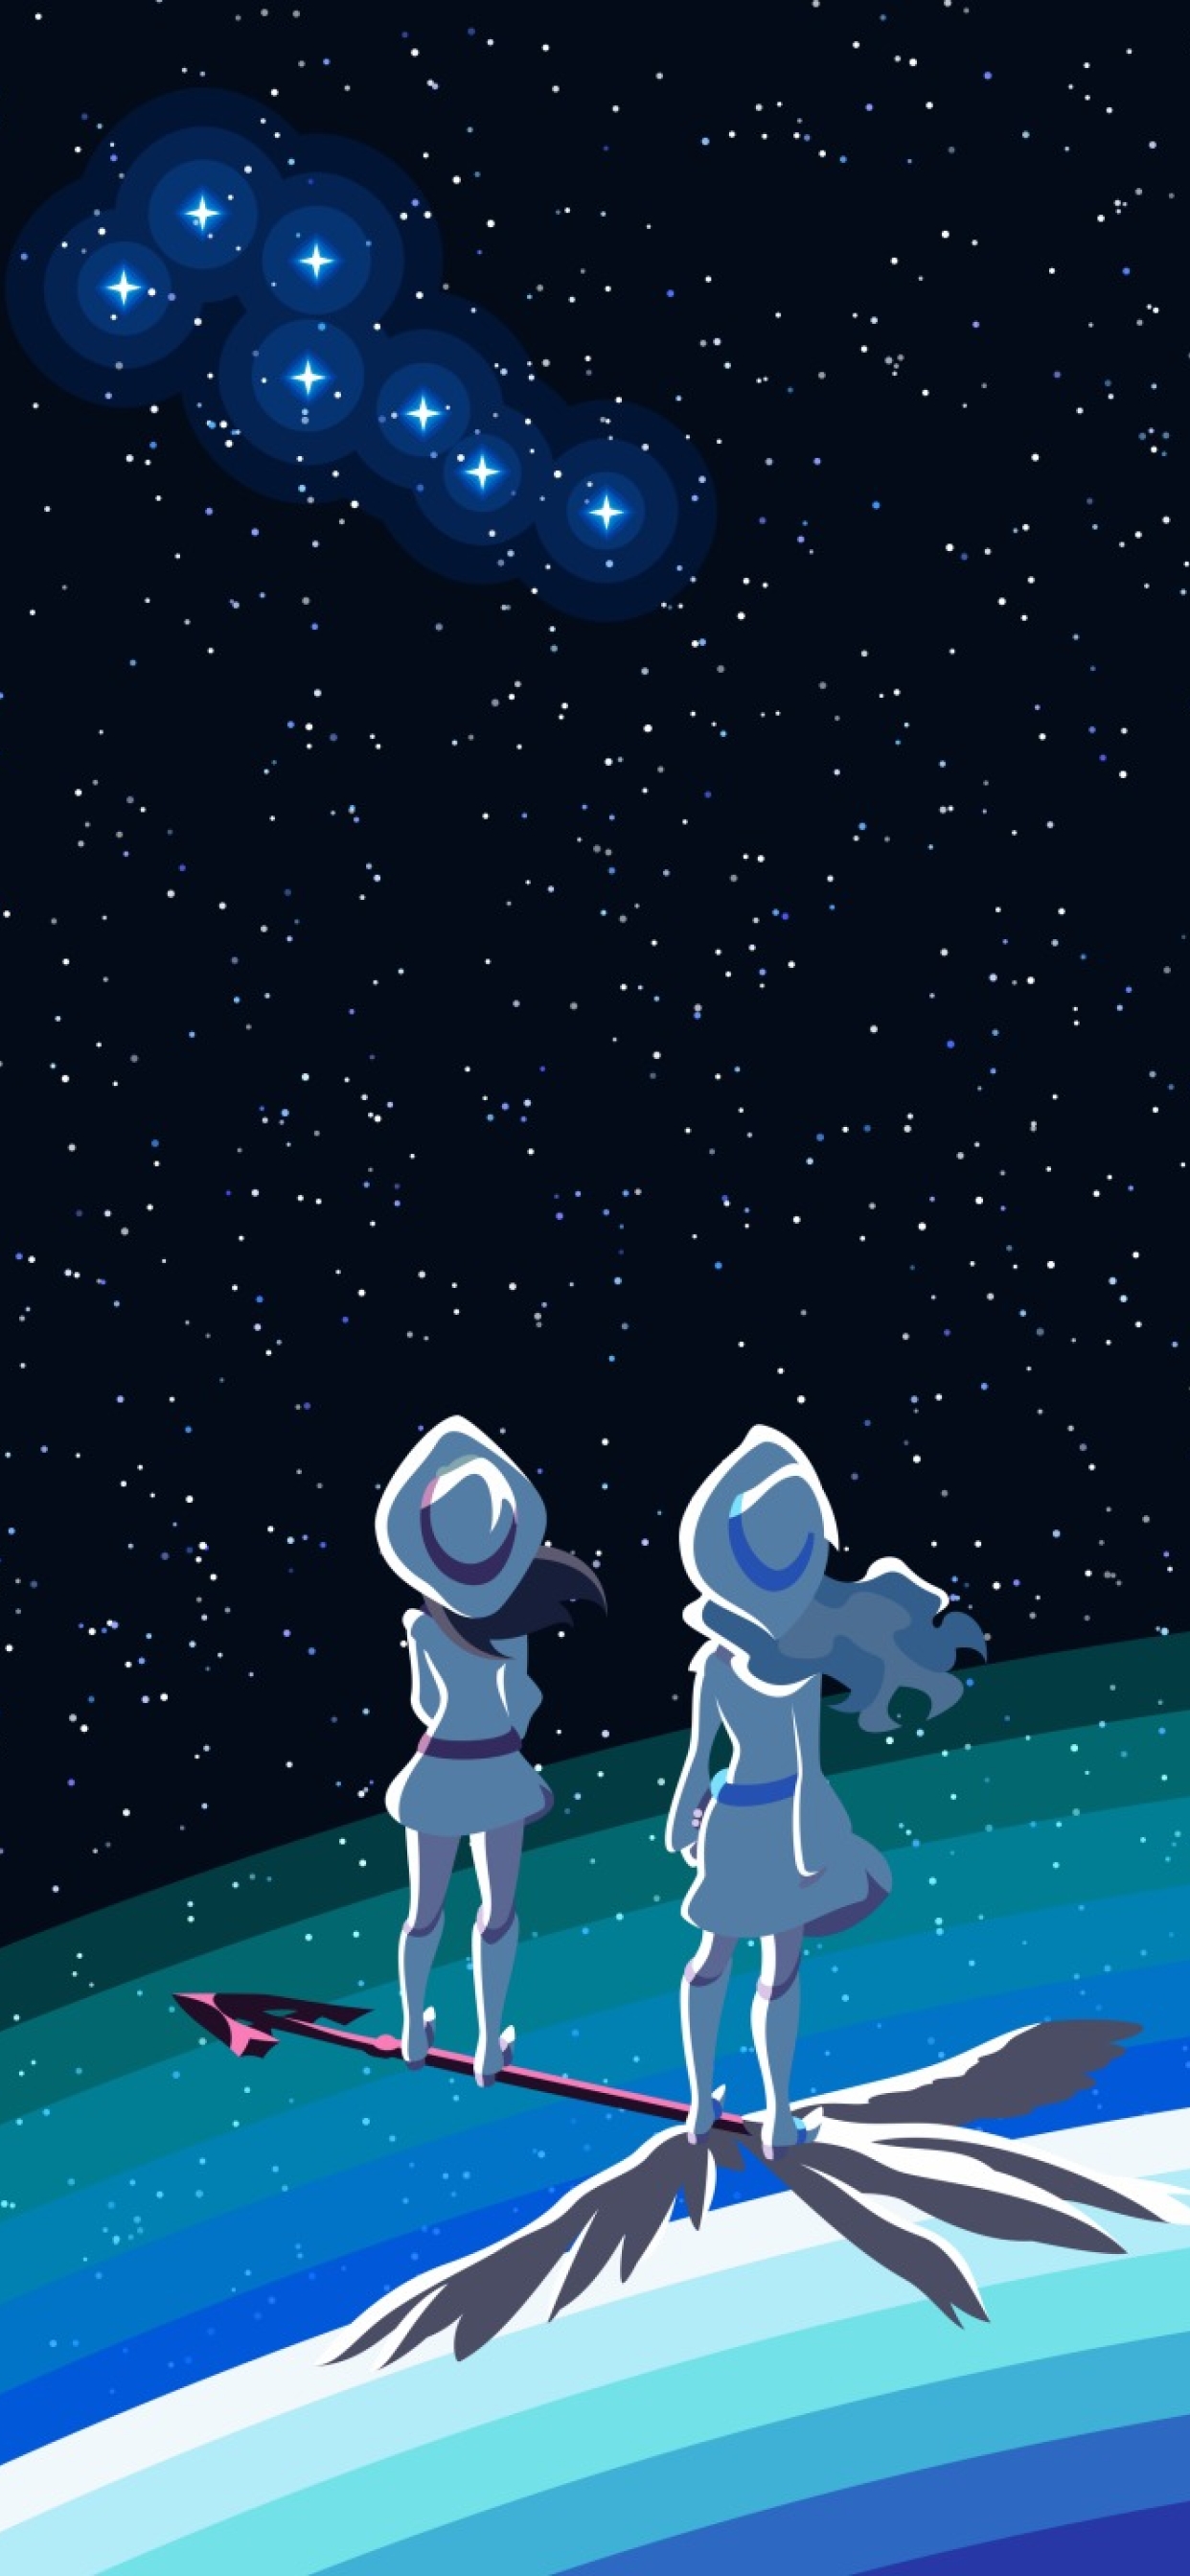 An illustration of two astronauts standing on a planet looking up at the stars. - Witch